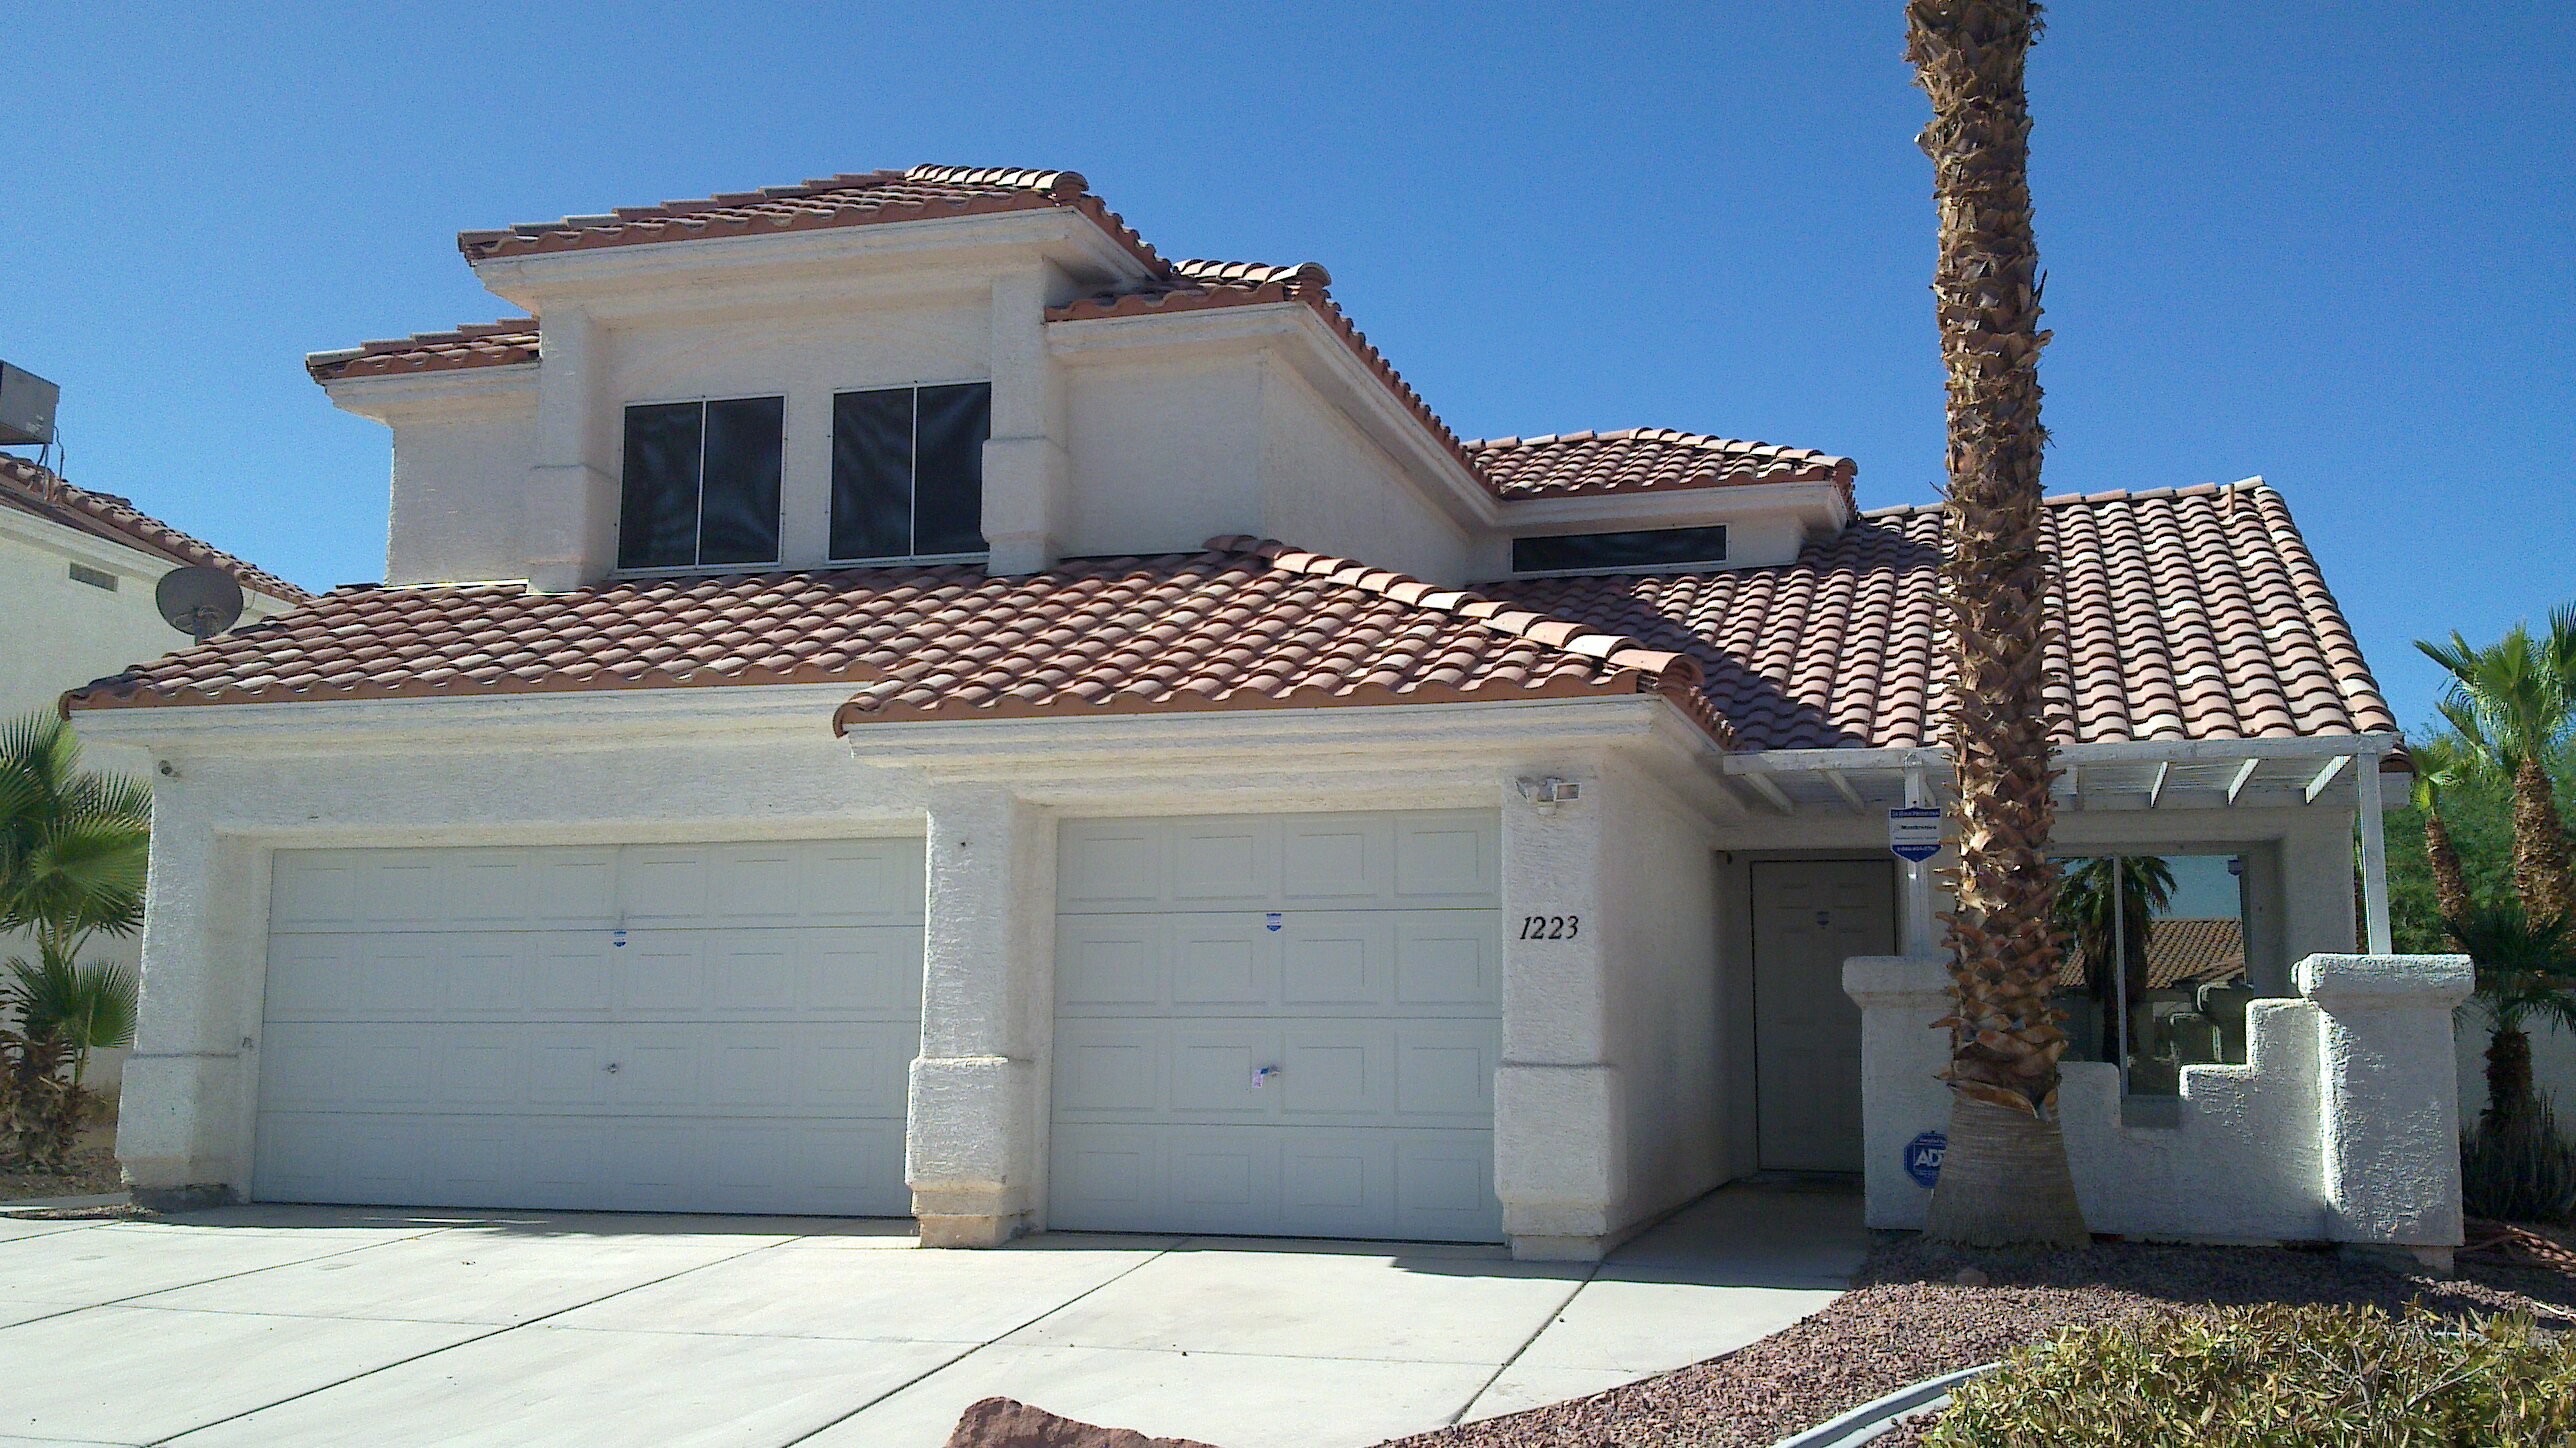 4 bed 2.5 bath home in North Las Vegas for Sale